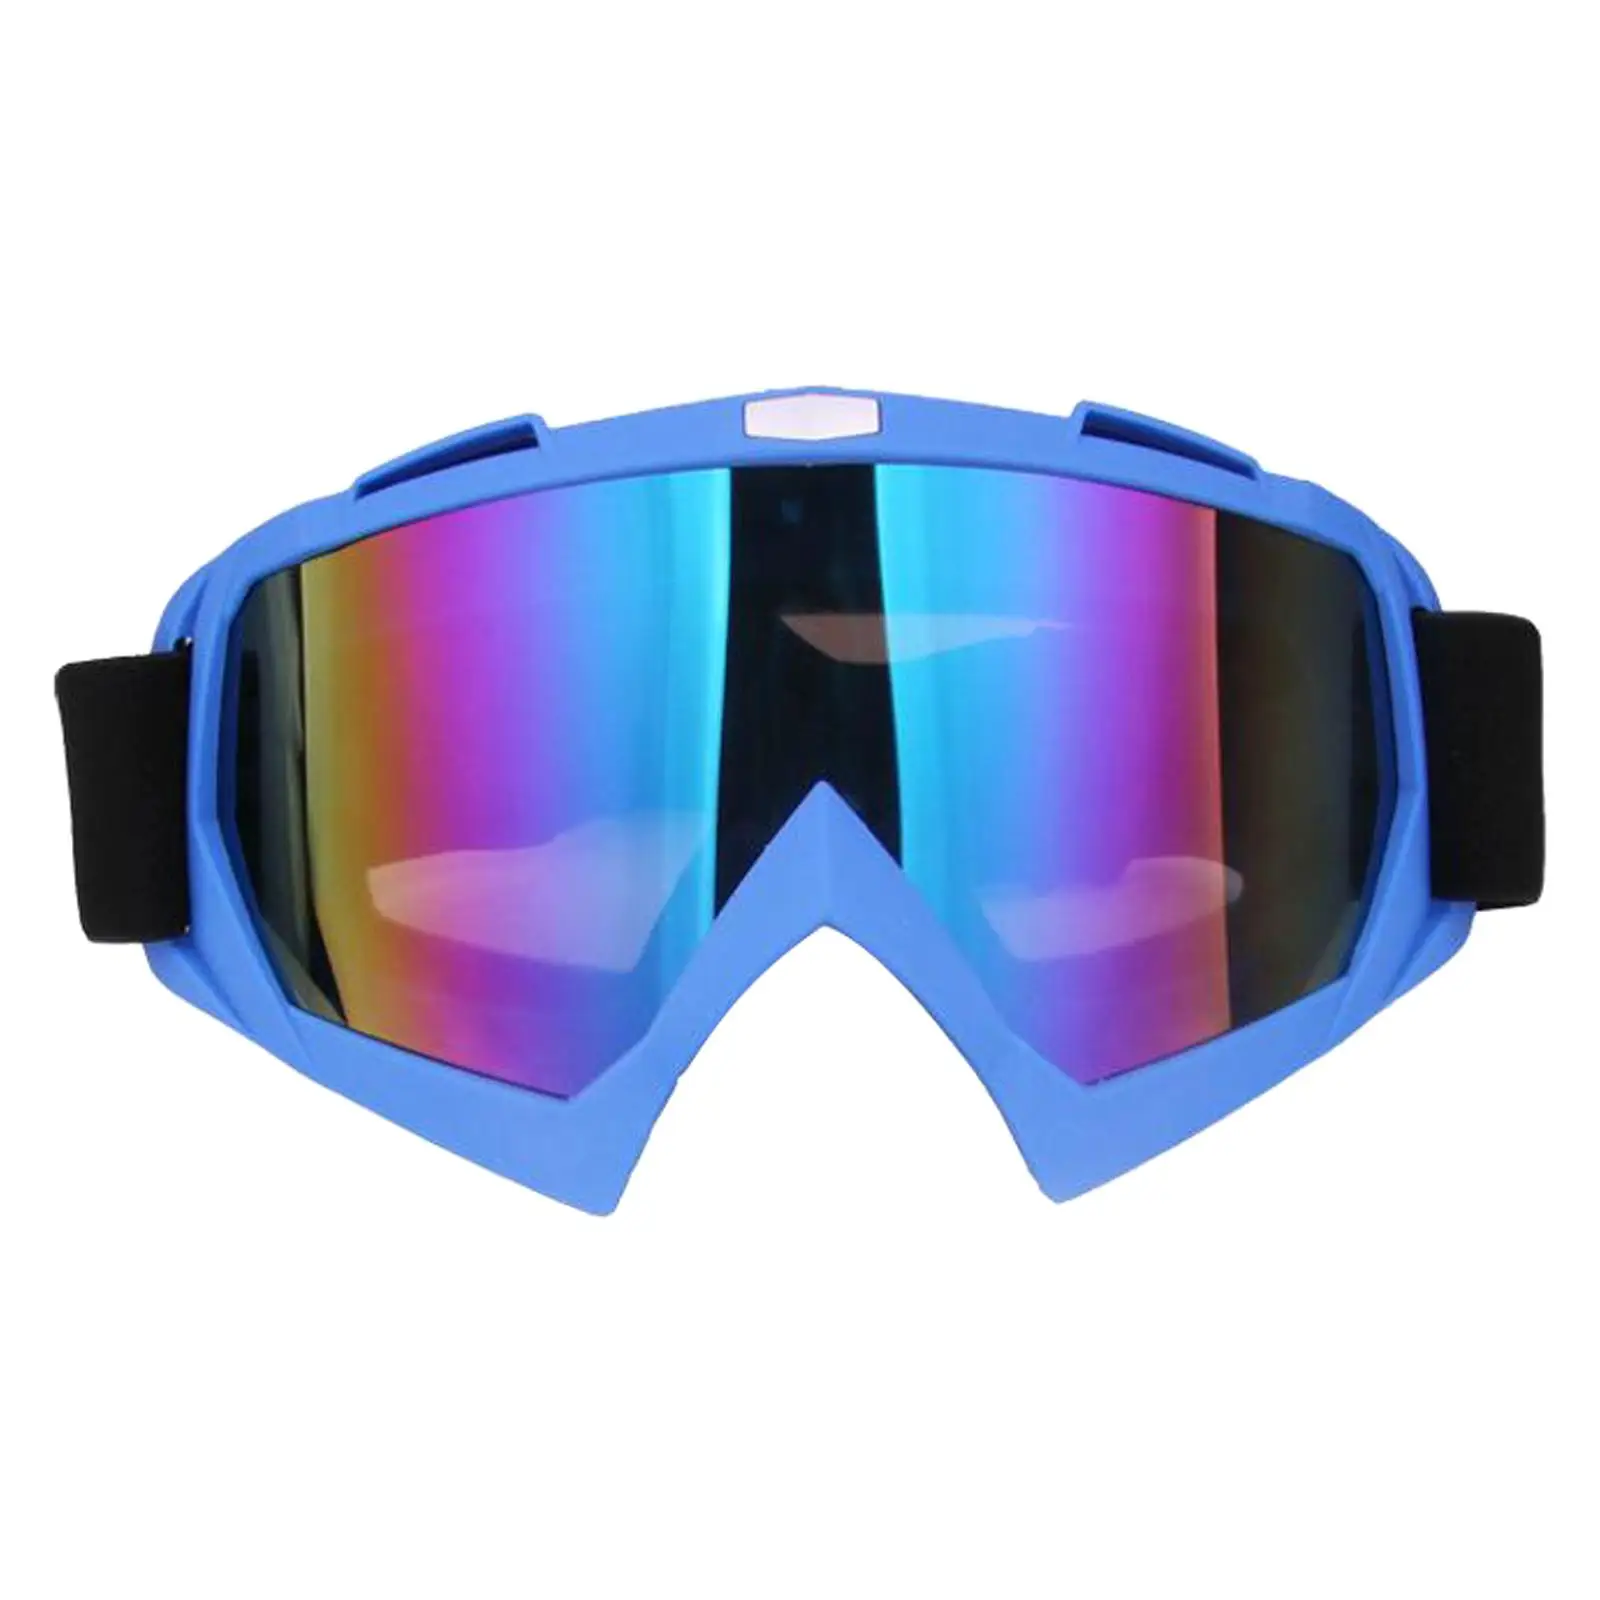 Snowmobile Skiing Safety Goggles Windproof Glasses Climbing Motorcycle Goggles,